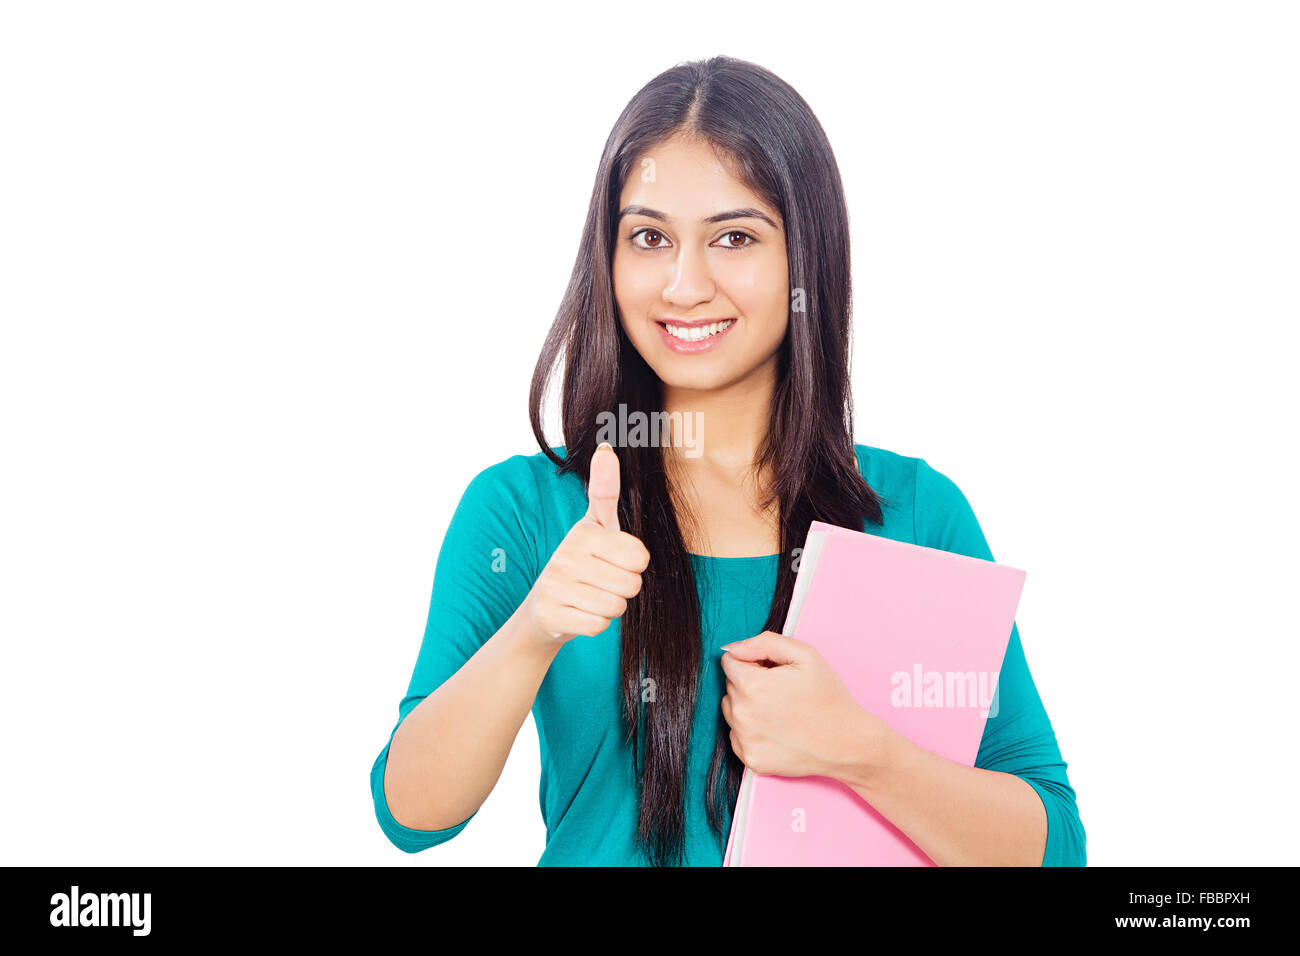 1 indian Young Woman College Student Thumbs Up showing Stock Photo